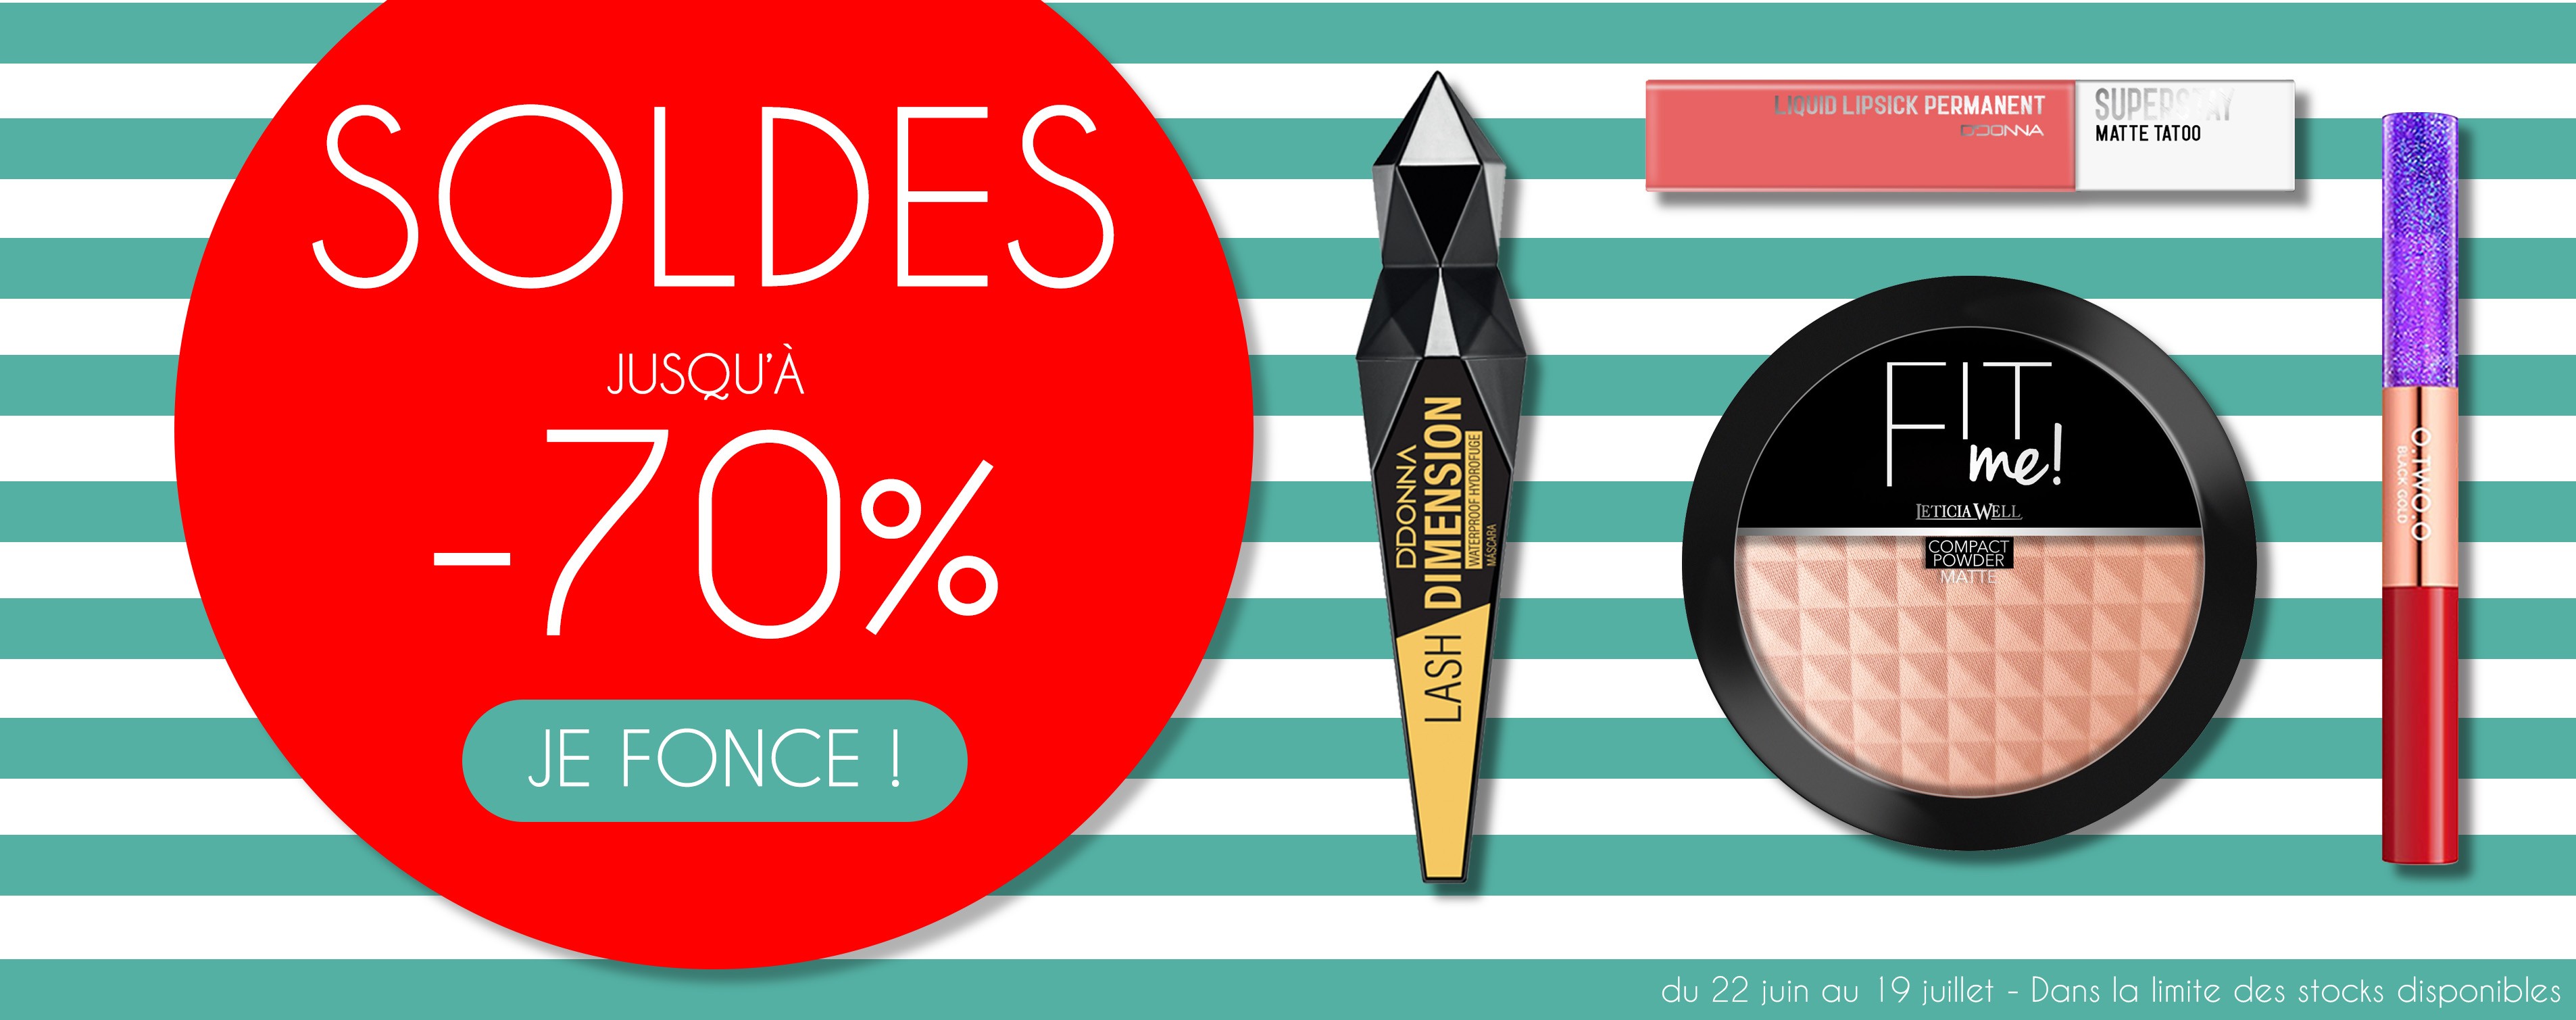 Soldes Maquillage - Maquillage pas cher